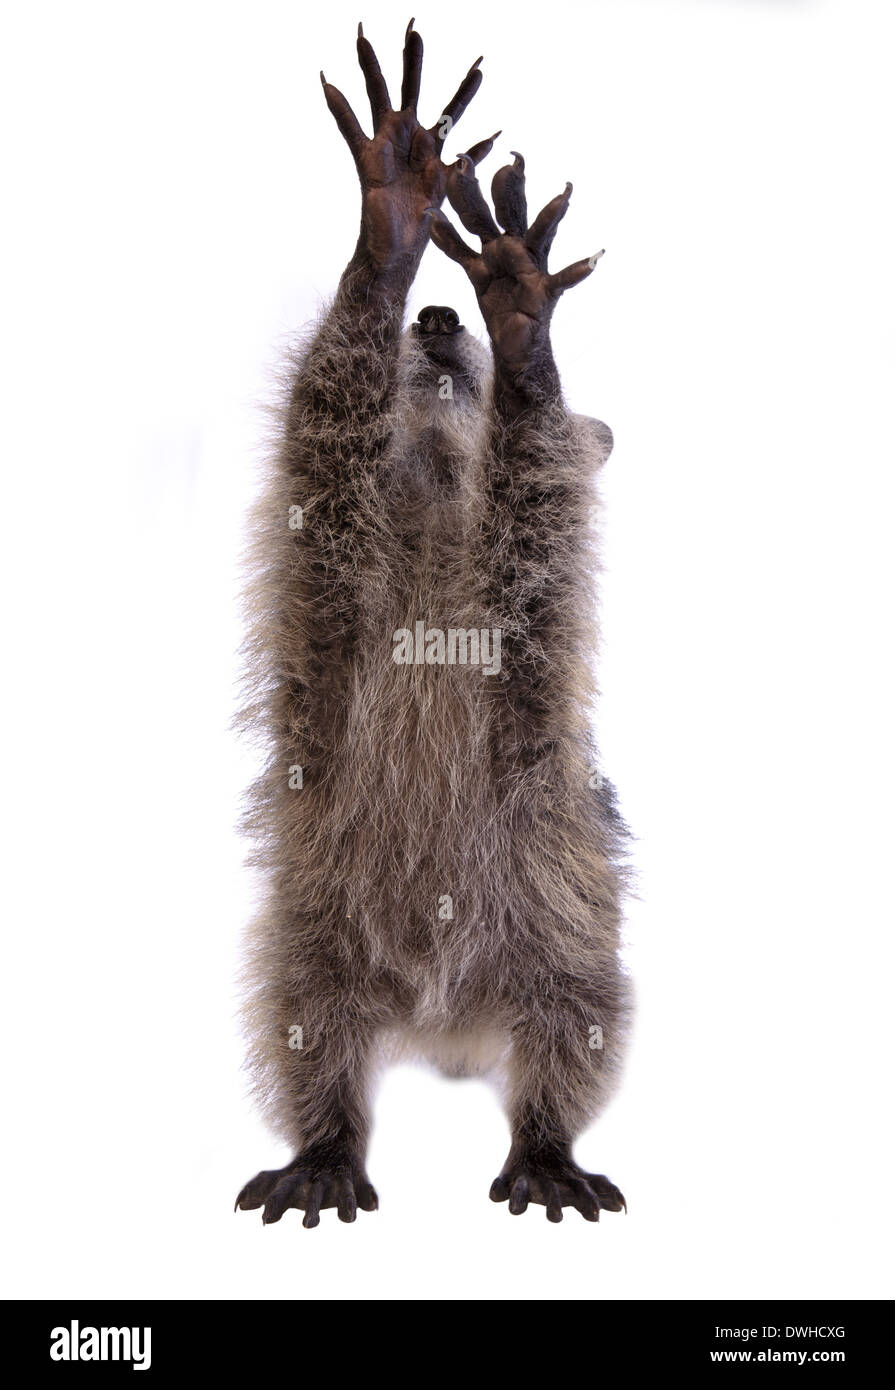 Raccoon stretching reaching up with hands out isolated on white background Stock Photo